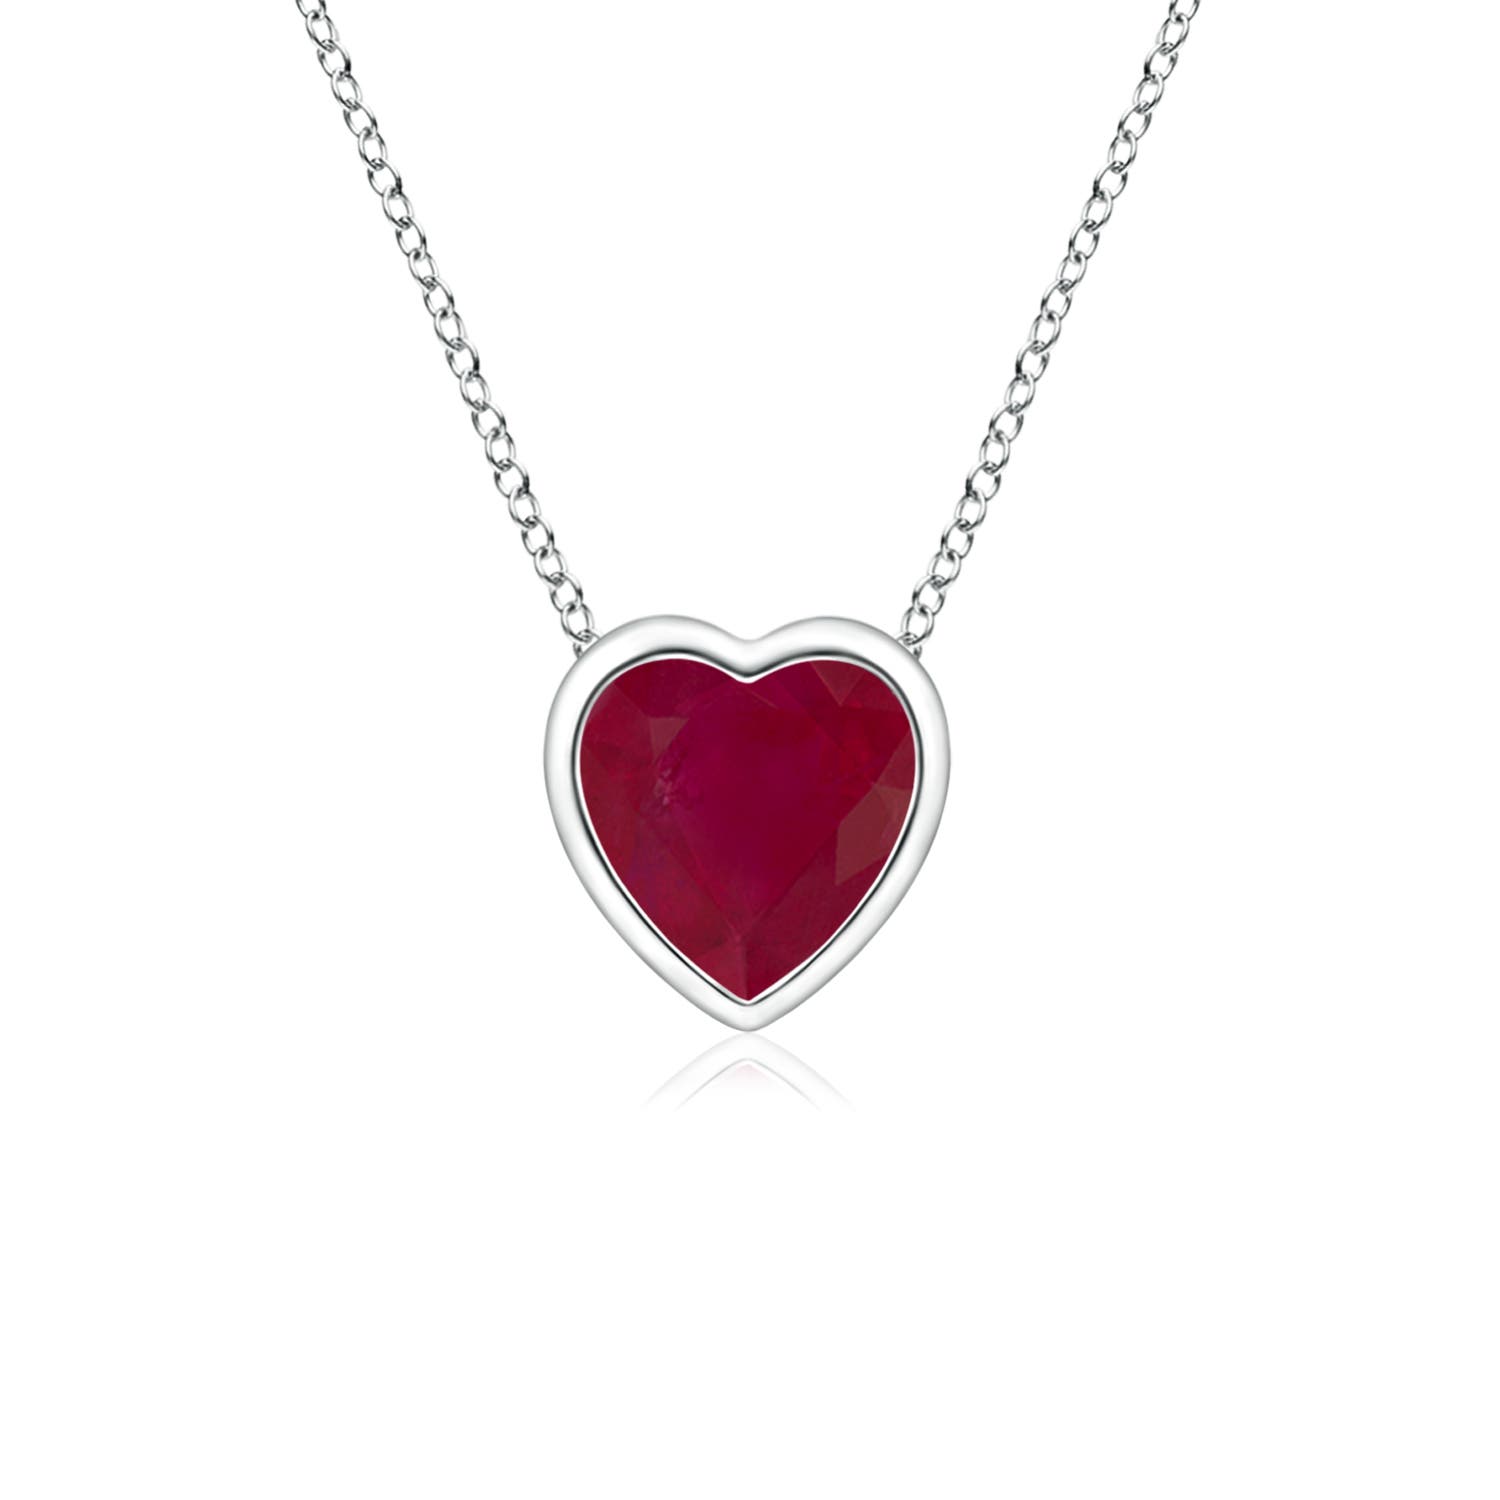 A - Ruby / 0.3 CT / 14 KT White Gold